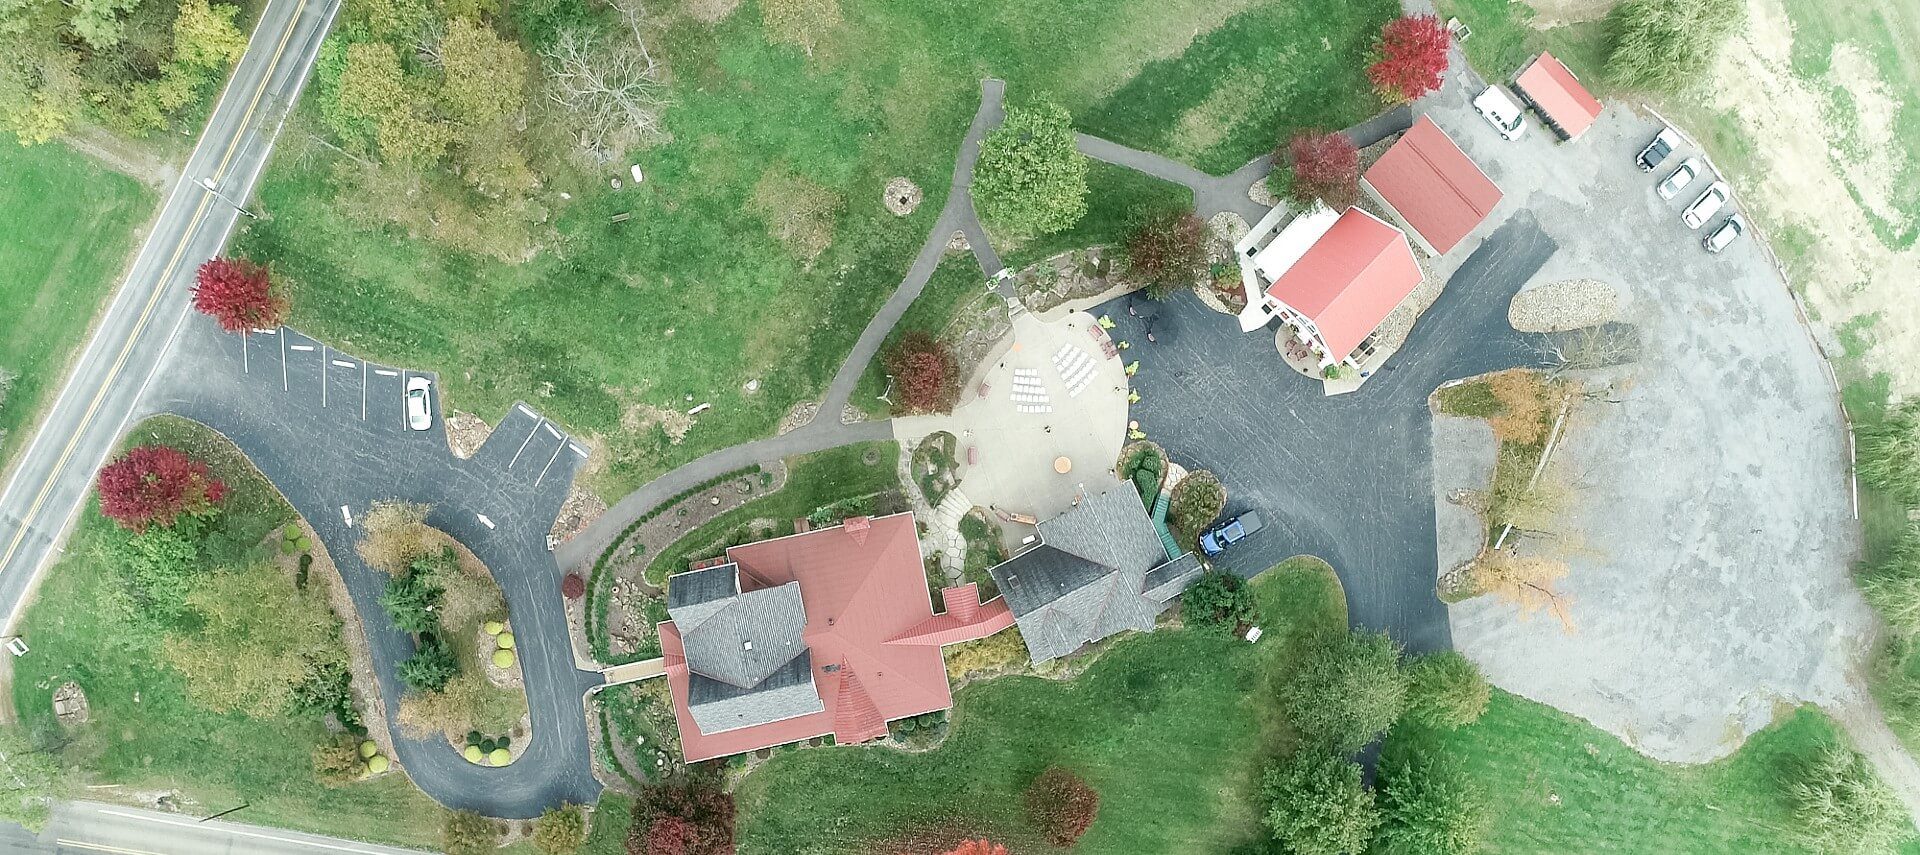 Overhead aerial image of home with multiple outbuildings, two parking lots and expansive lawn areas